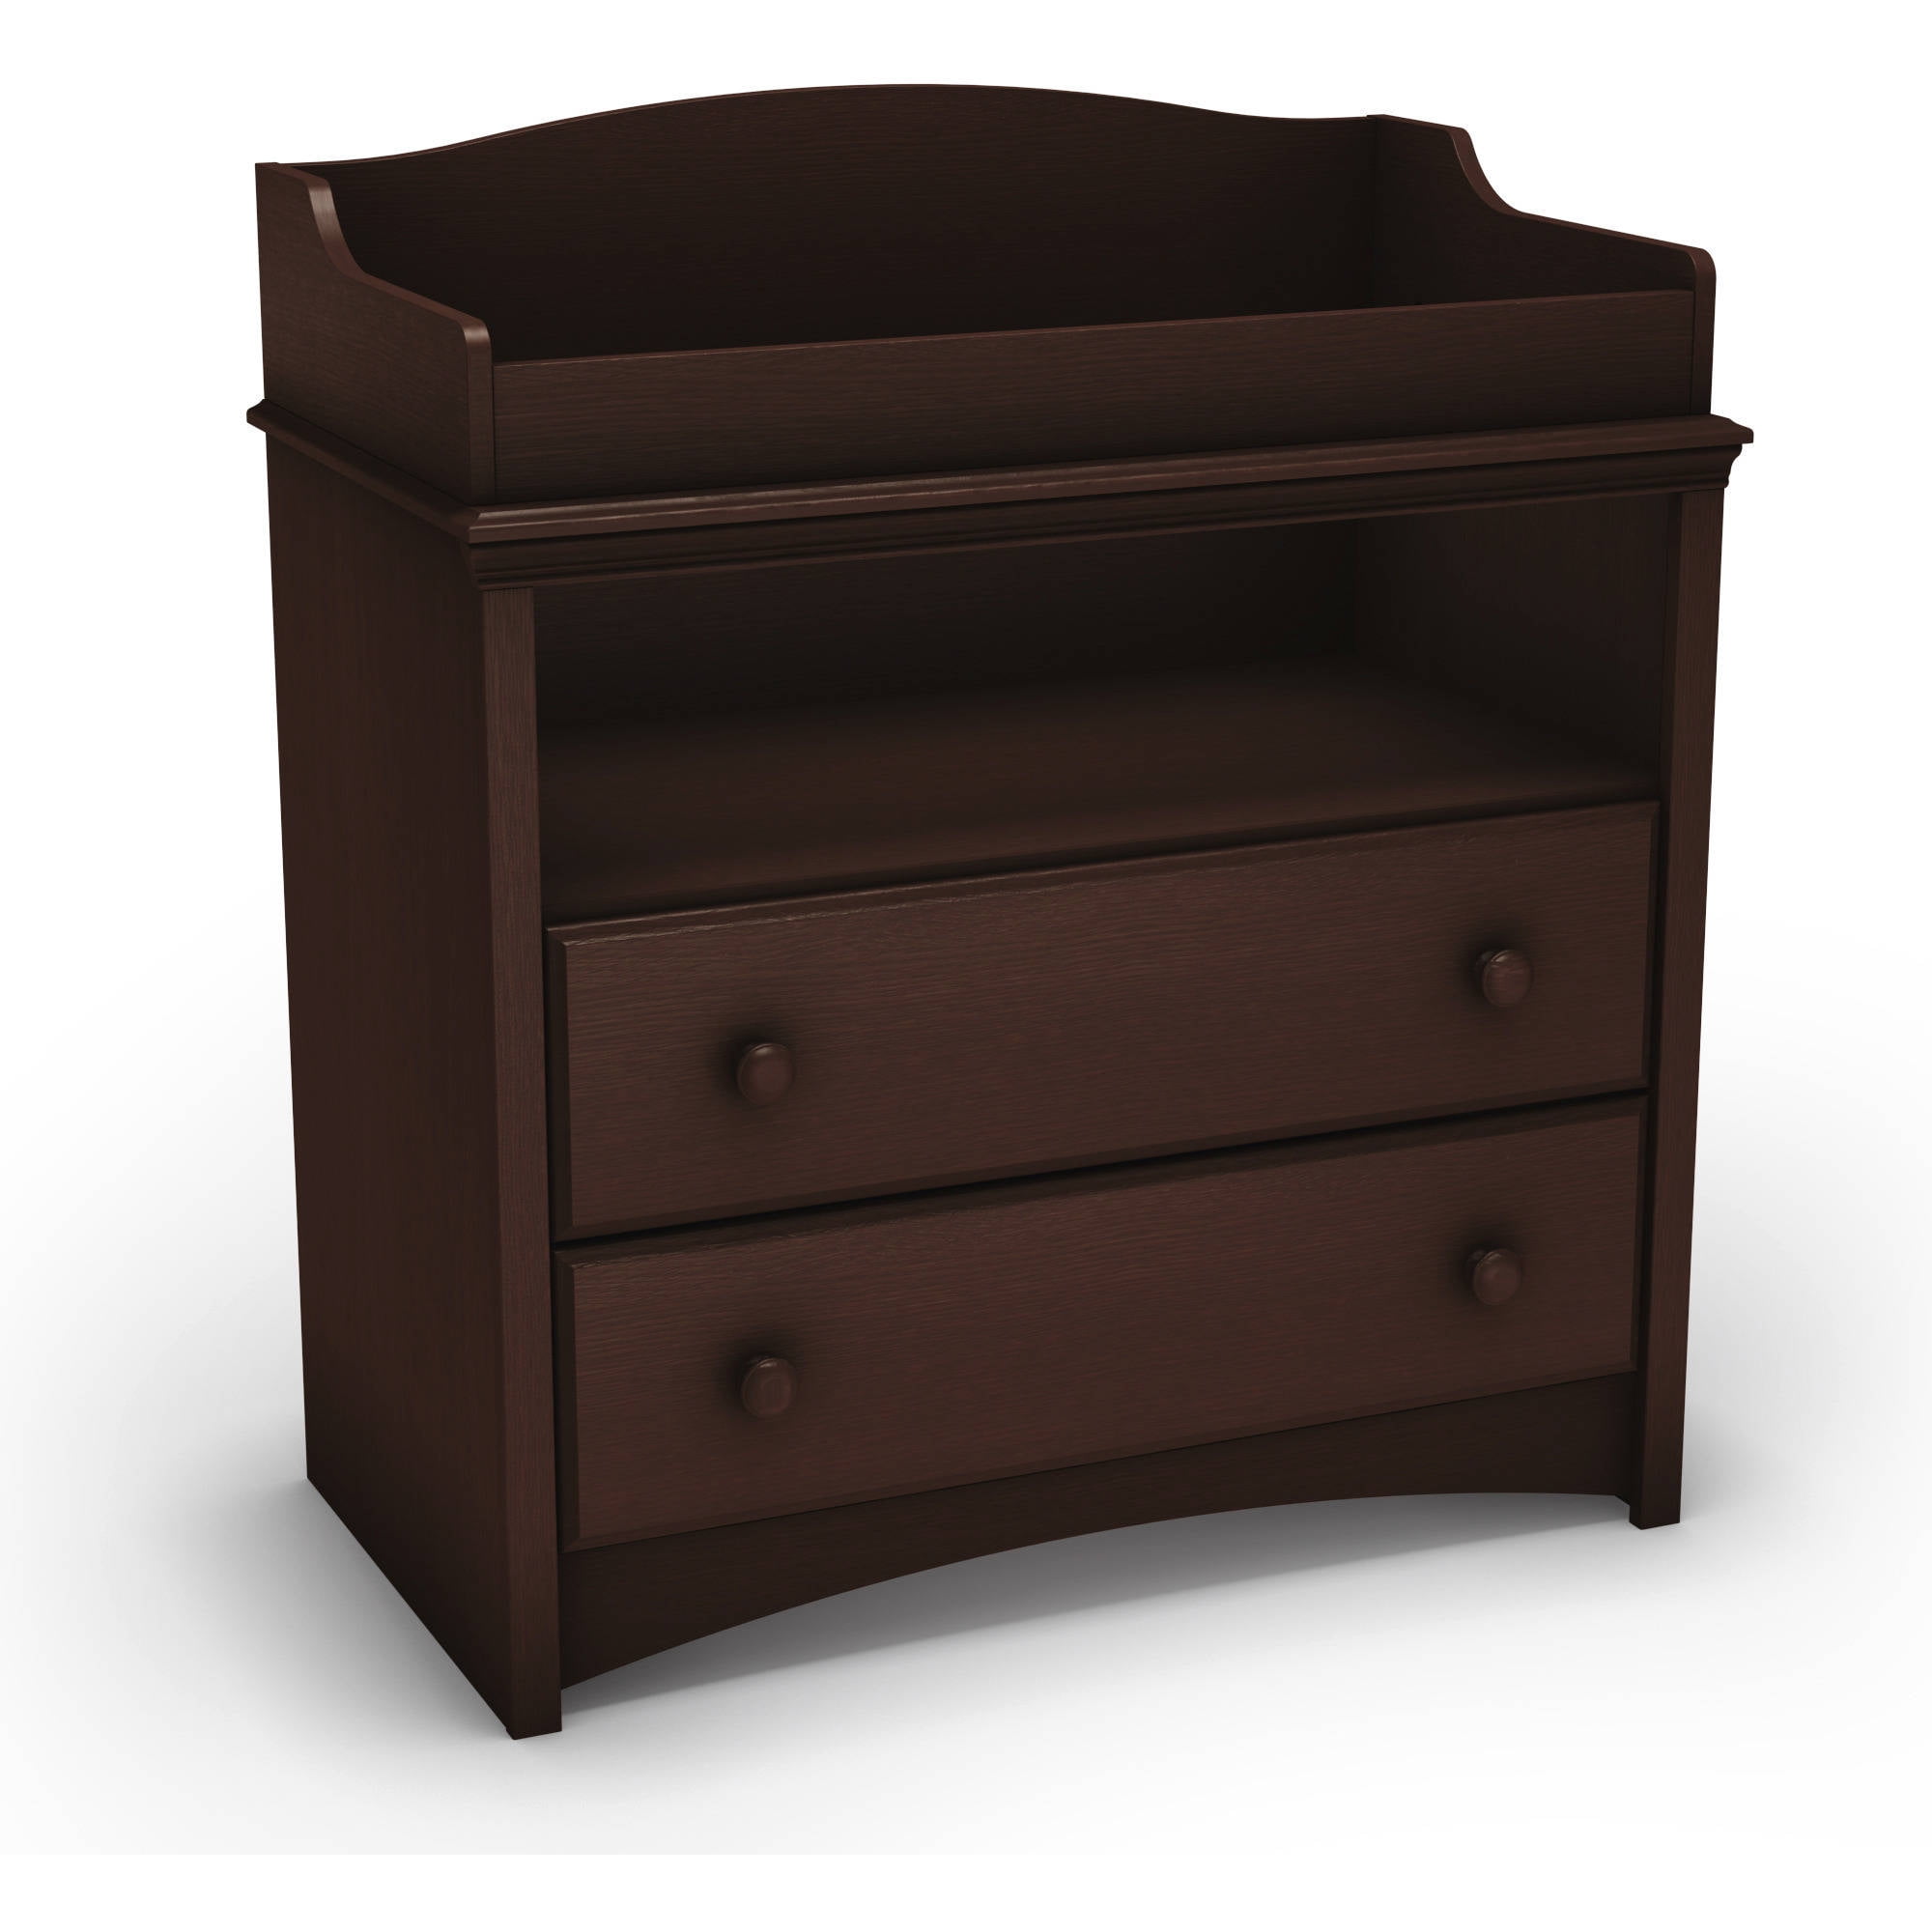 South S Angel Changing Table With, How To Anchor Changing Pad Dresser